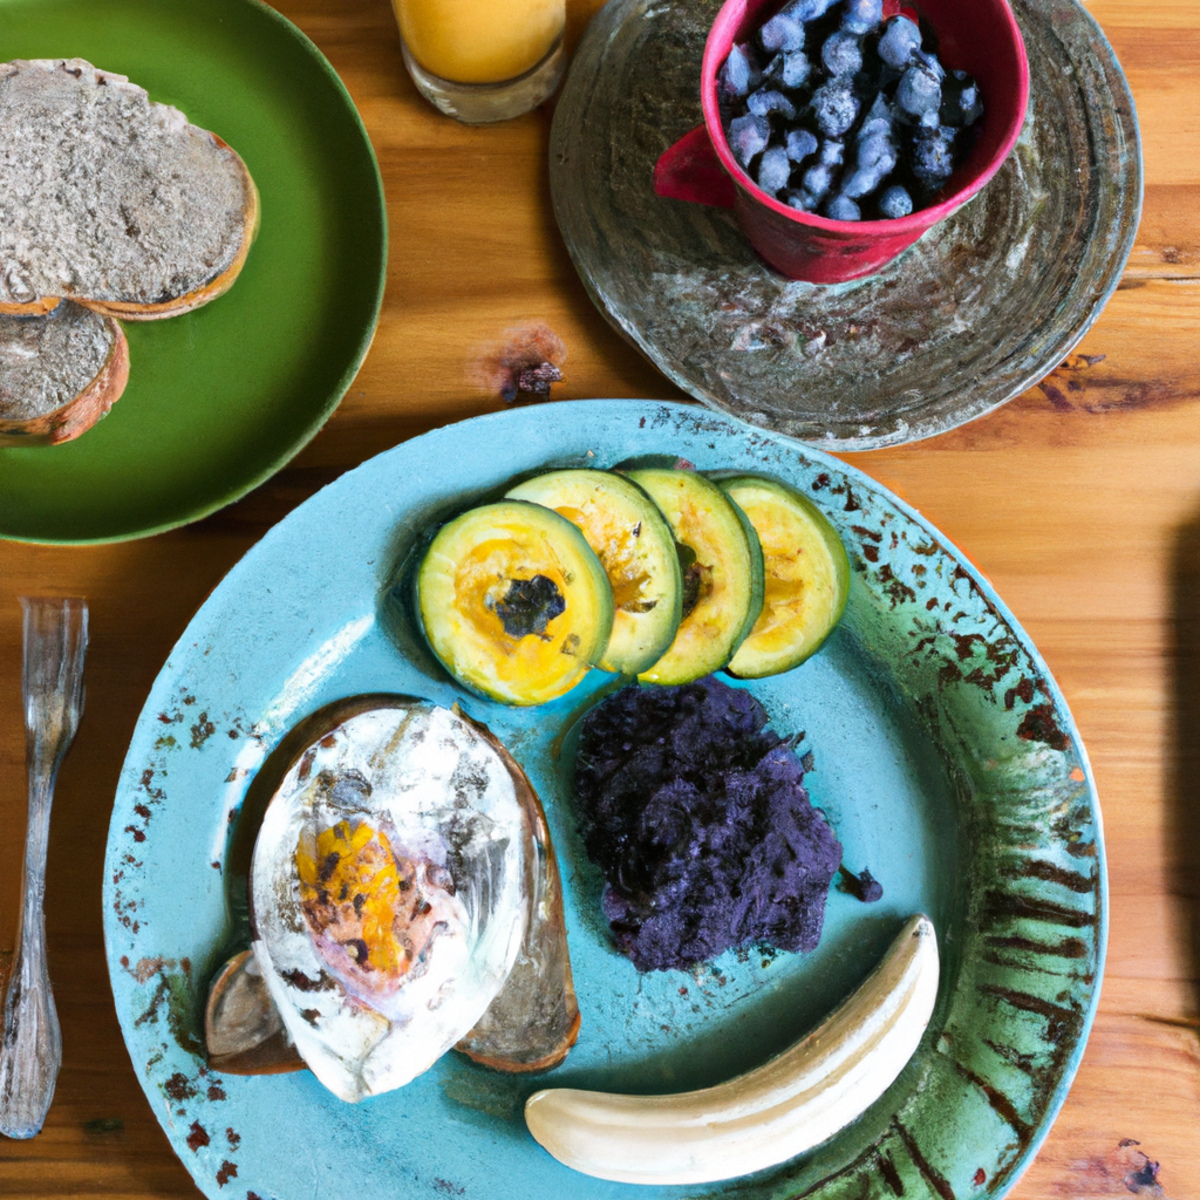 The photo shows a colorful array of functional foods arranged on a wooden table. In the center of the frame, there is a bowl of blueberries, surrounded by sliced bananas, almonds, and chia seeds. A glass of green smoothie sits on the left side of the table, while a plate of avocado toast with a poached egg is on the right. The background is blurred, but hints of a gym or fitness studio can be seen, suggesting that these foods are meant to be consumed before or after a workout. The photo captures the vibrant colors and textures of the foods, making them look both appetizing and energizing.